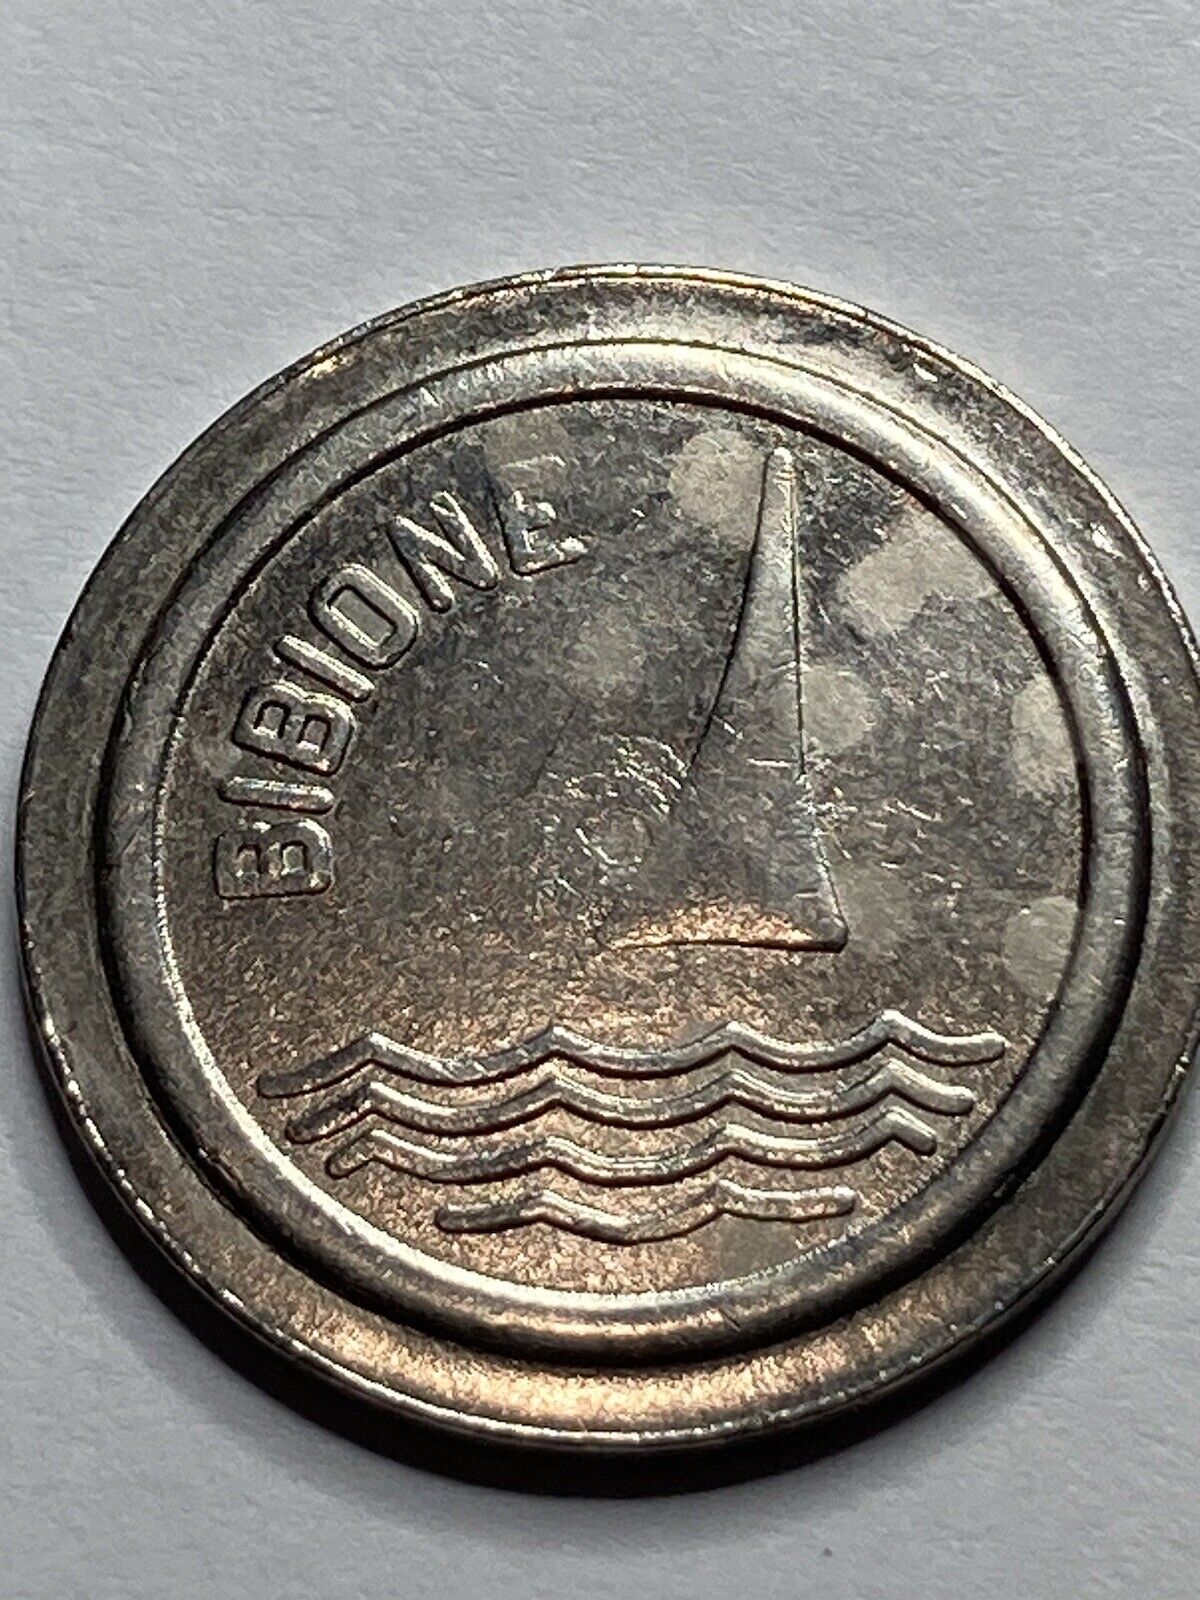 RARE ITALY BIBIONE ARCADE TOKEN  GOOD FOR 1 FREE PLAY #rq1